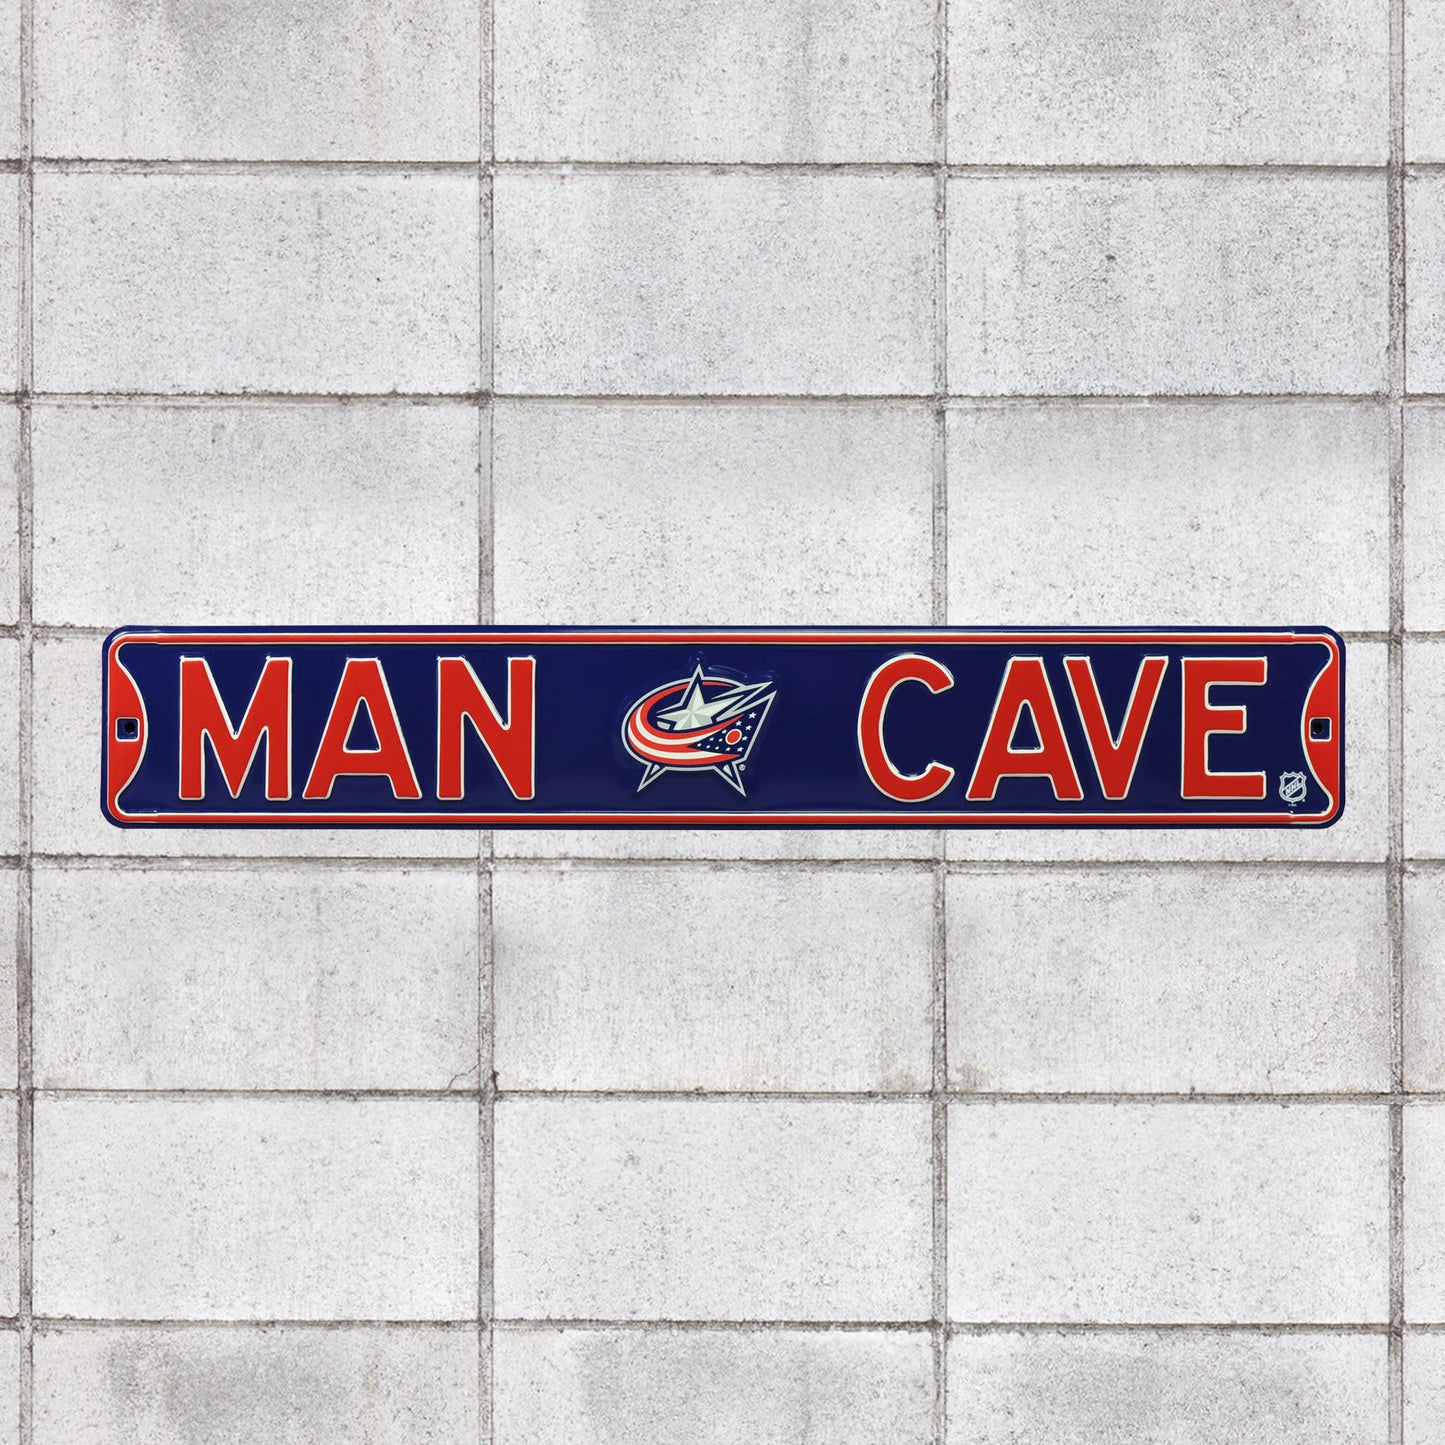 Columbus Blue Jackets: Man Cave - Officially Licensed NHL Metal Street Sign